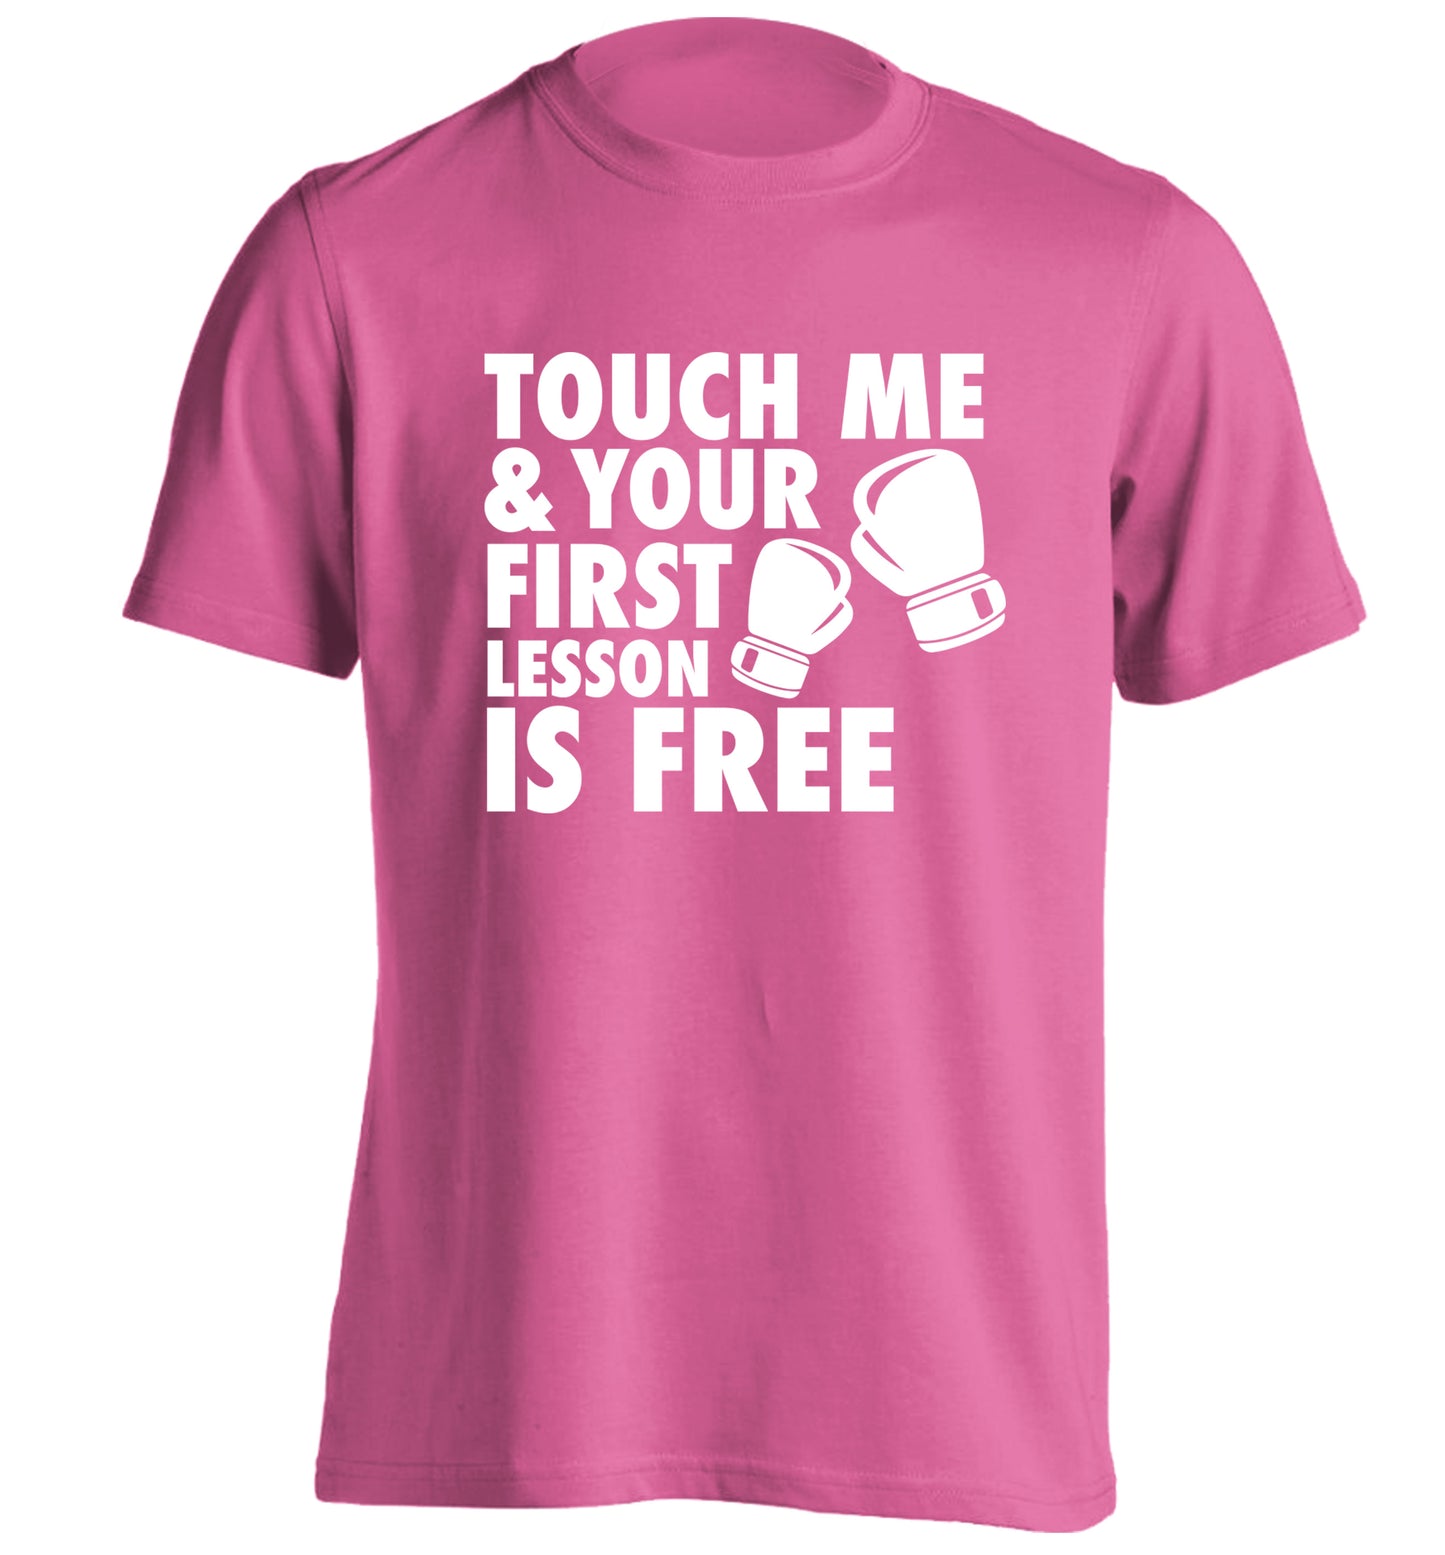 Touch me and your First Lesson is Free  adults unisex pink Tshirt 2XL